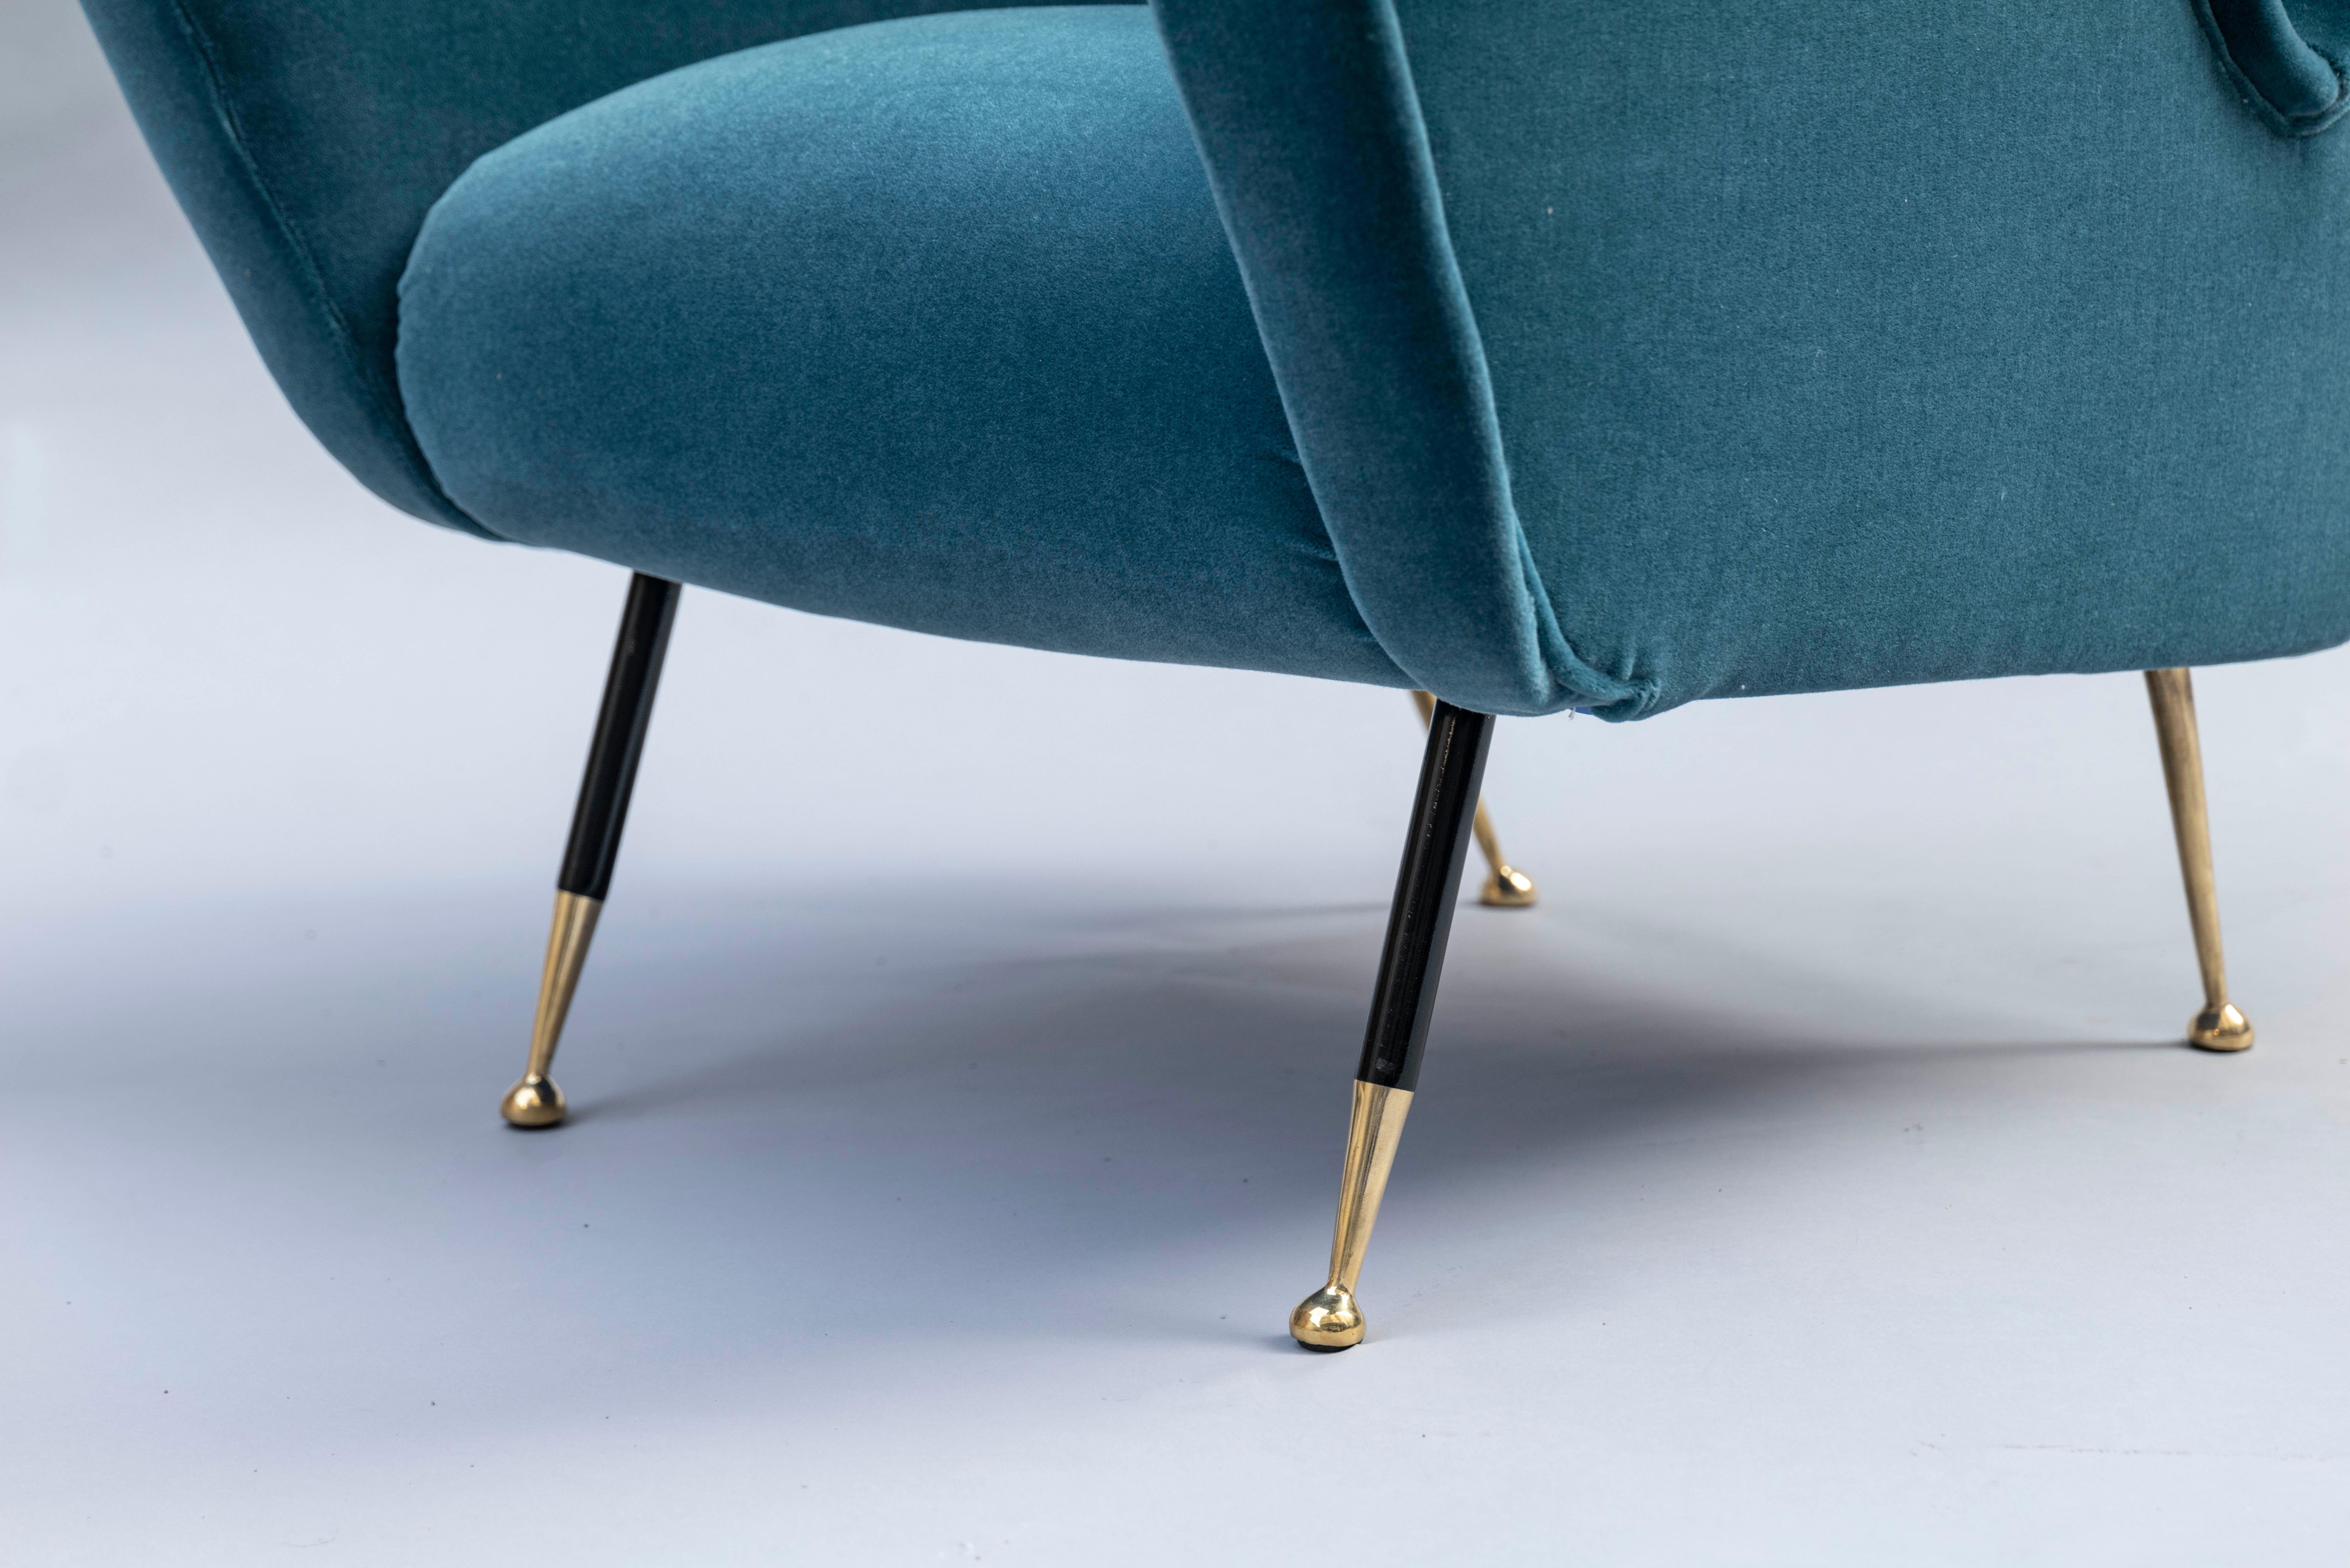 Italian mid-century armchair attributed to Gio' Ponti, 1950s, front legs in black painted steel and brass, rear legs in brass, newly reupholstered in mohair velvet by Pierre Frey.